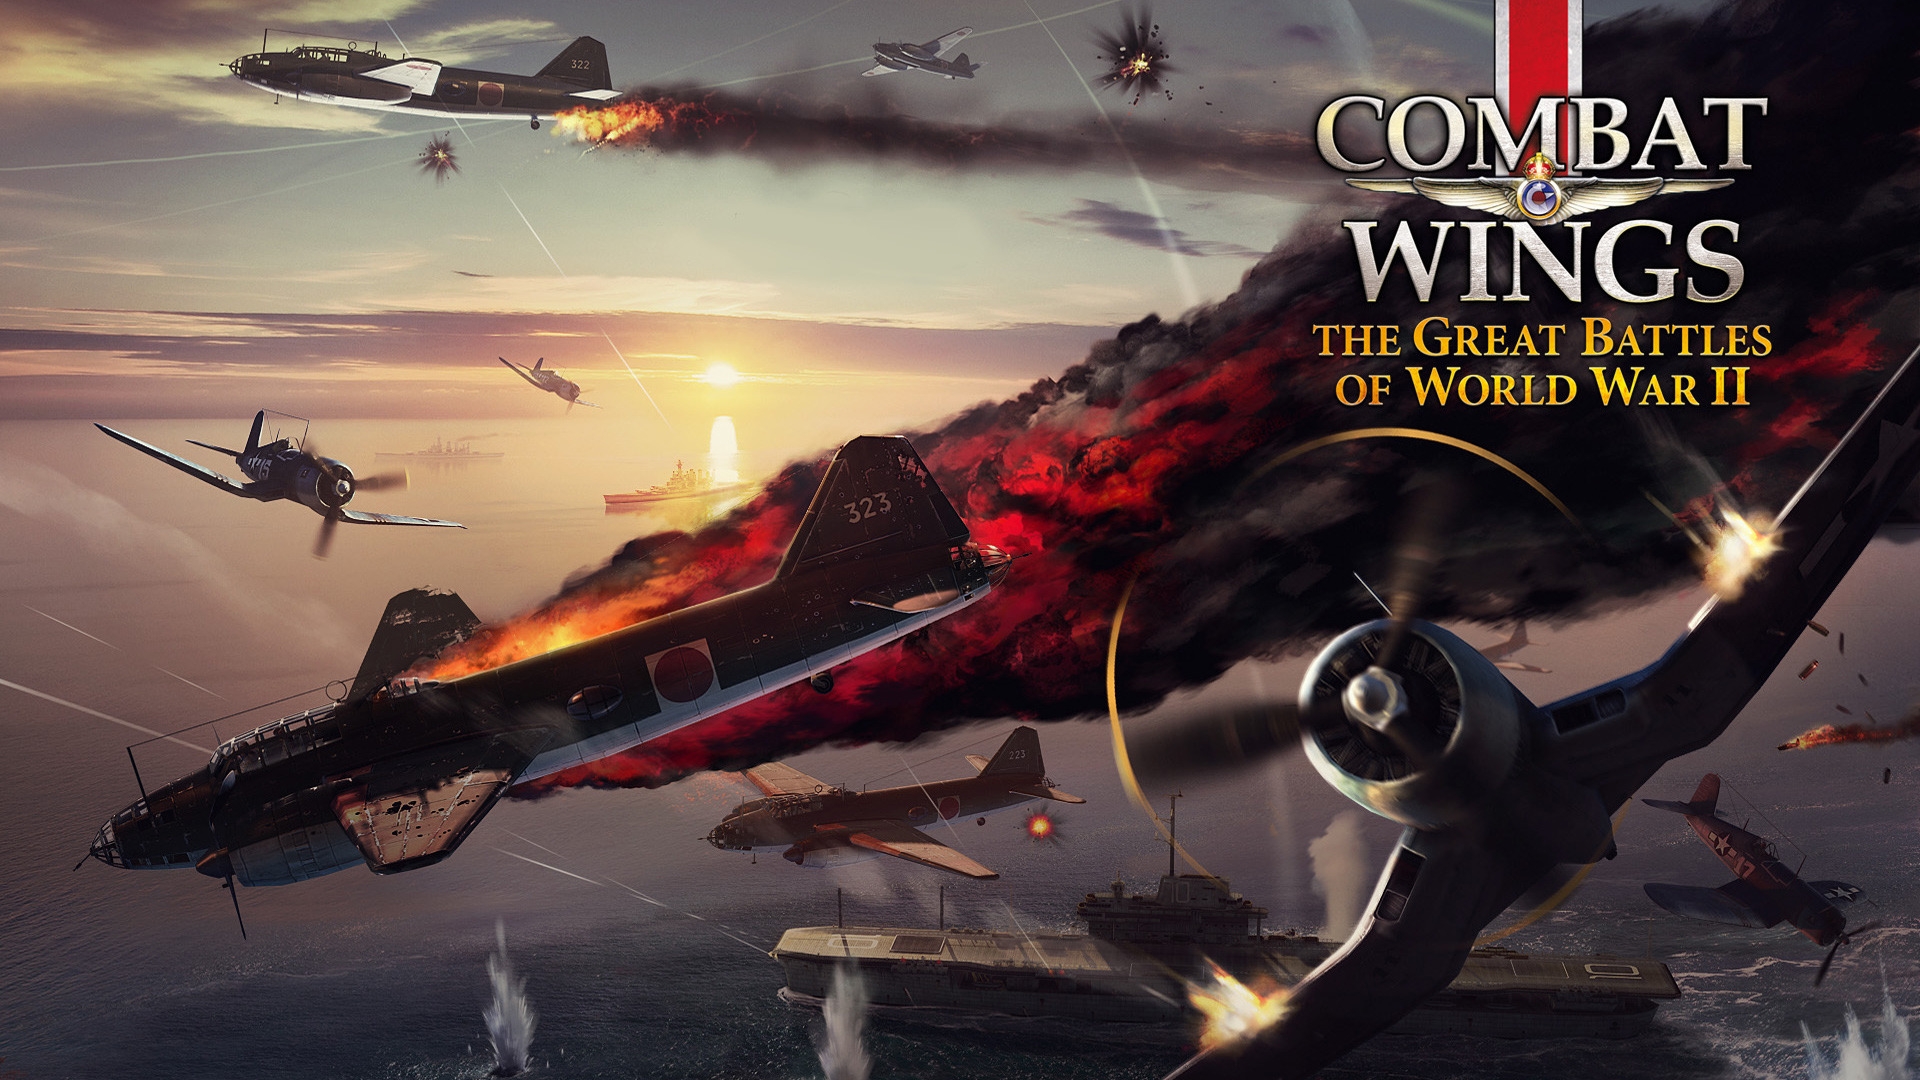 Combat Wings for 1920 x 1080 HDTV 1080p resolution